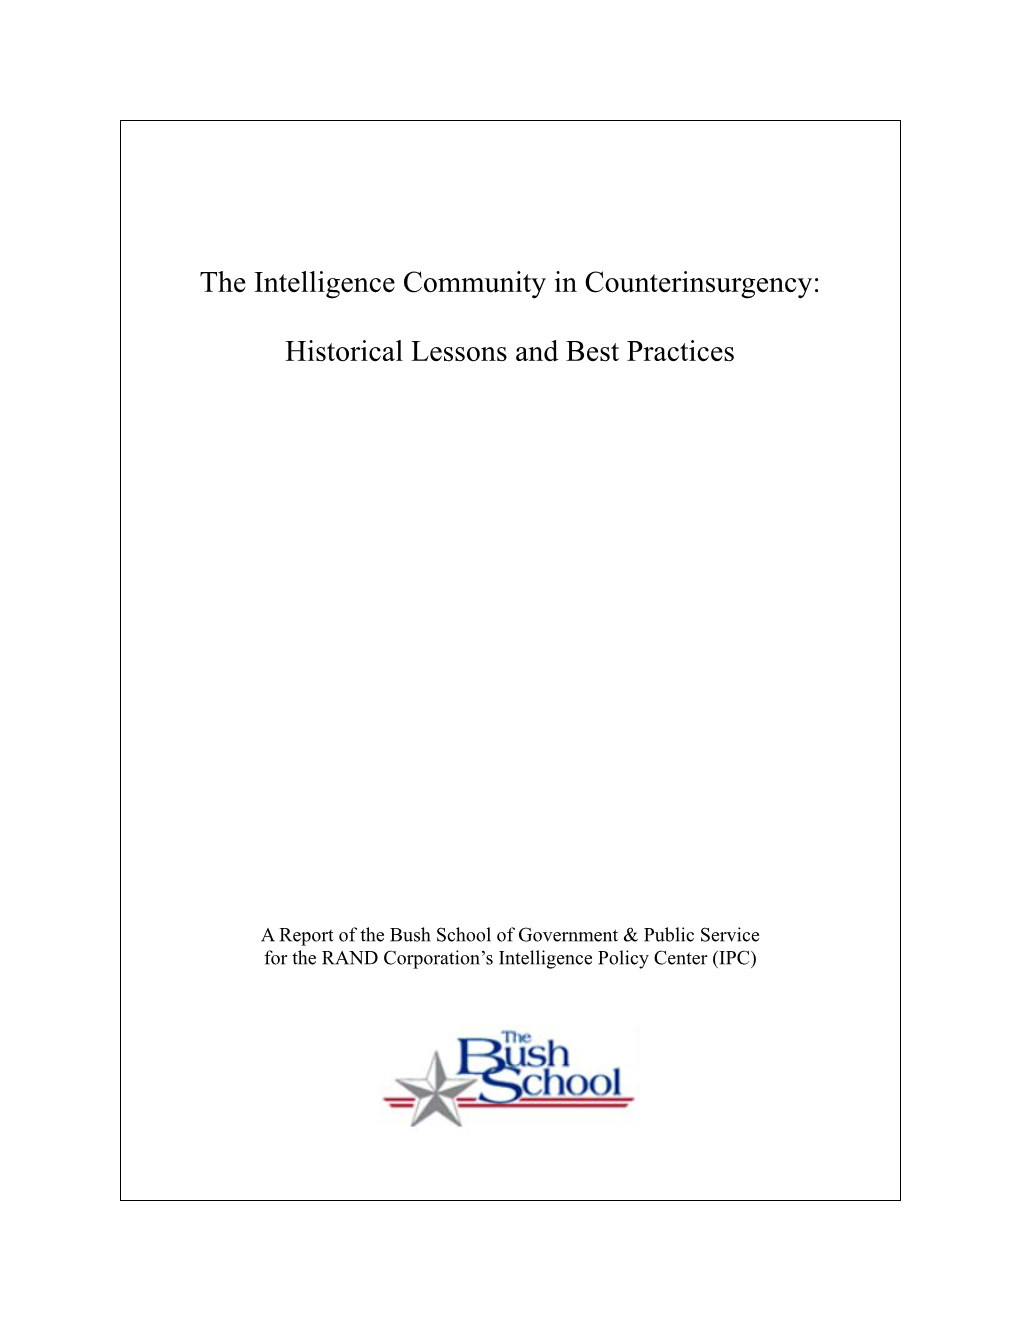 The Intelligence Community in Counterinsurgency